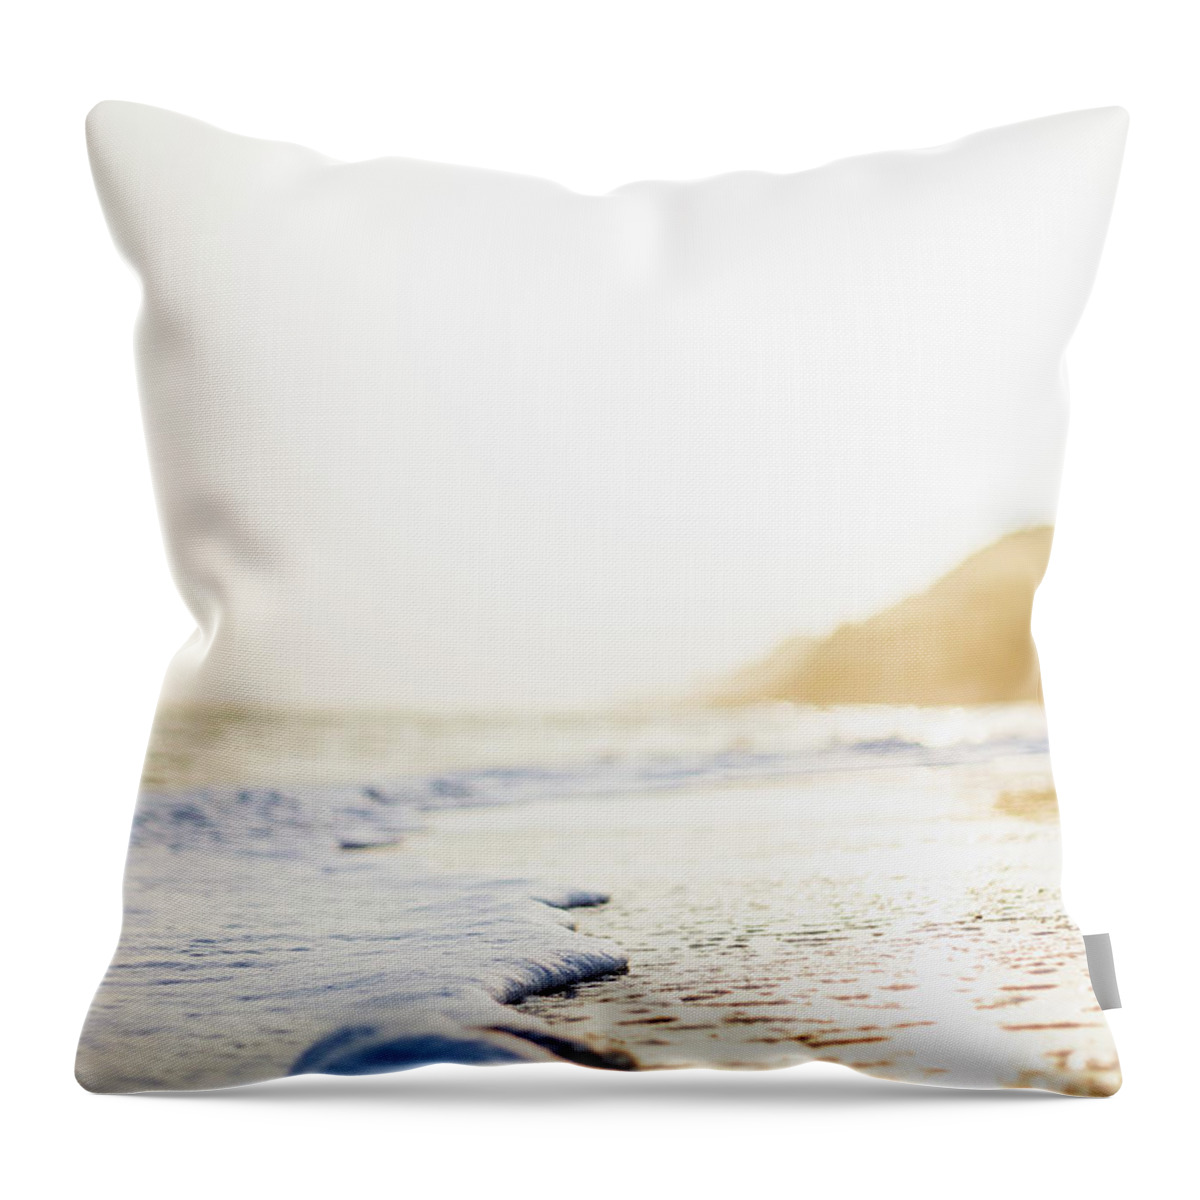 Tranquility Throw Pillow featuring the photograph Golden Waters On The South Coast Of The by Property Of Chad Powell